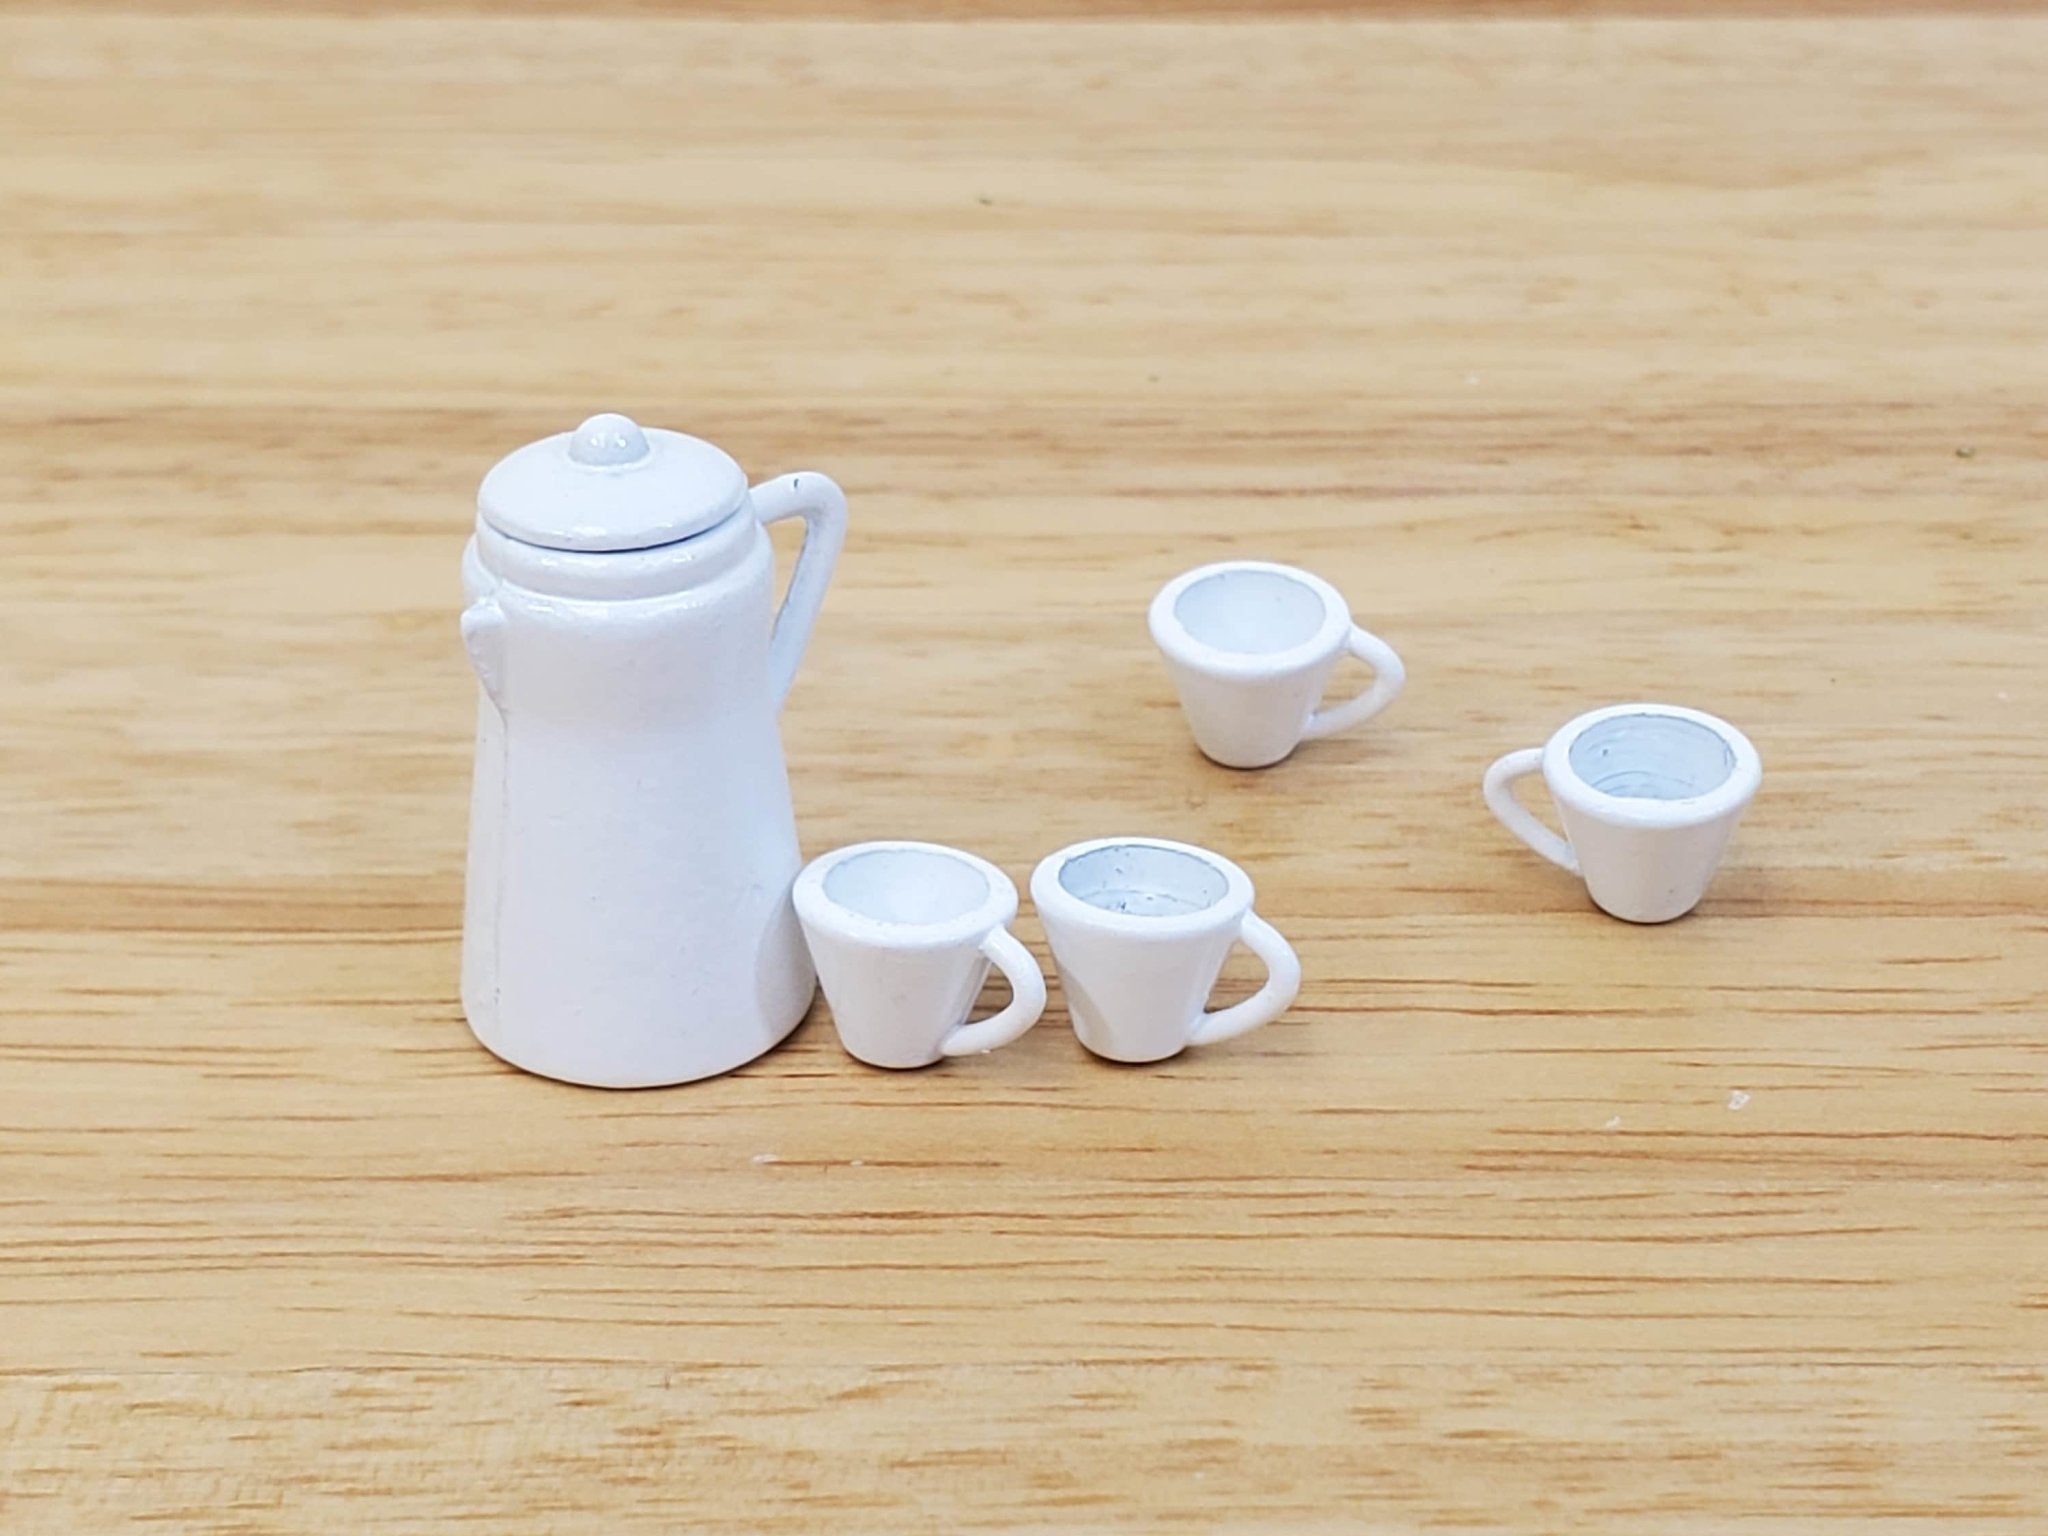 1:12 Scale Miniature Dollhouse Kitchen Accessory Pitcher and Cup